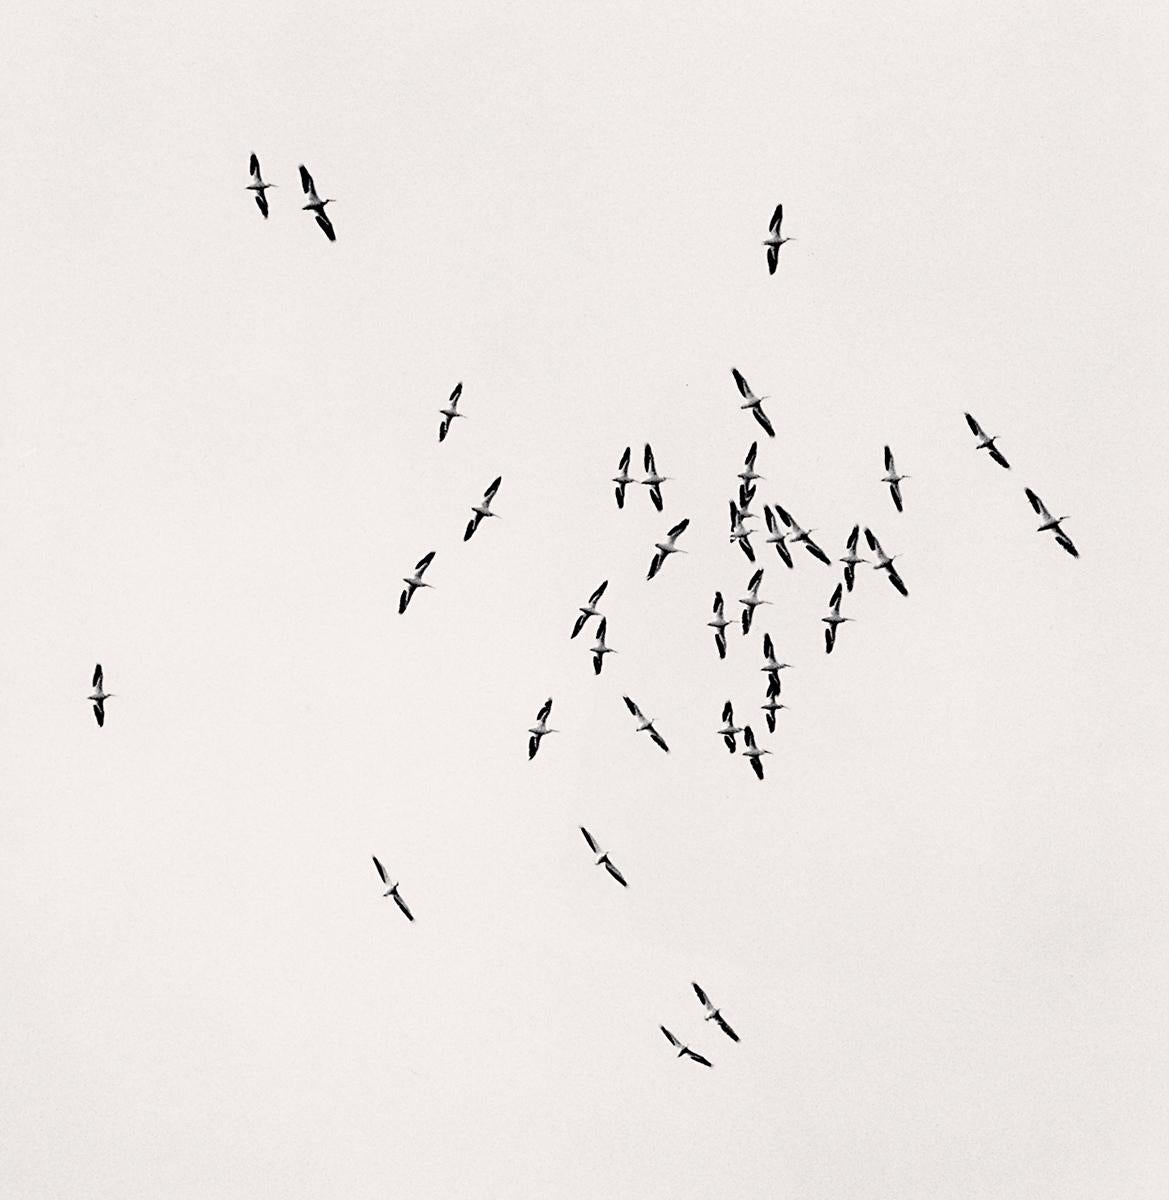 Thirty Six Birds, Isle of Skye, Scotland by Michael Kenna depicts a flock of birds flying overhead against a bright sky.

Sepia toned gelatin silver print
Image size: 8 x 7.75 in.
Mount size: 20 x 16 in.
Edition 12/45
Signed, dated and numbered in